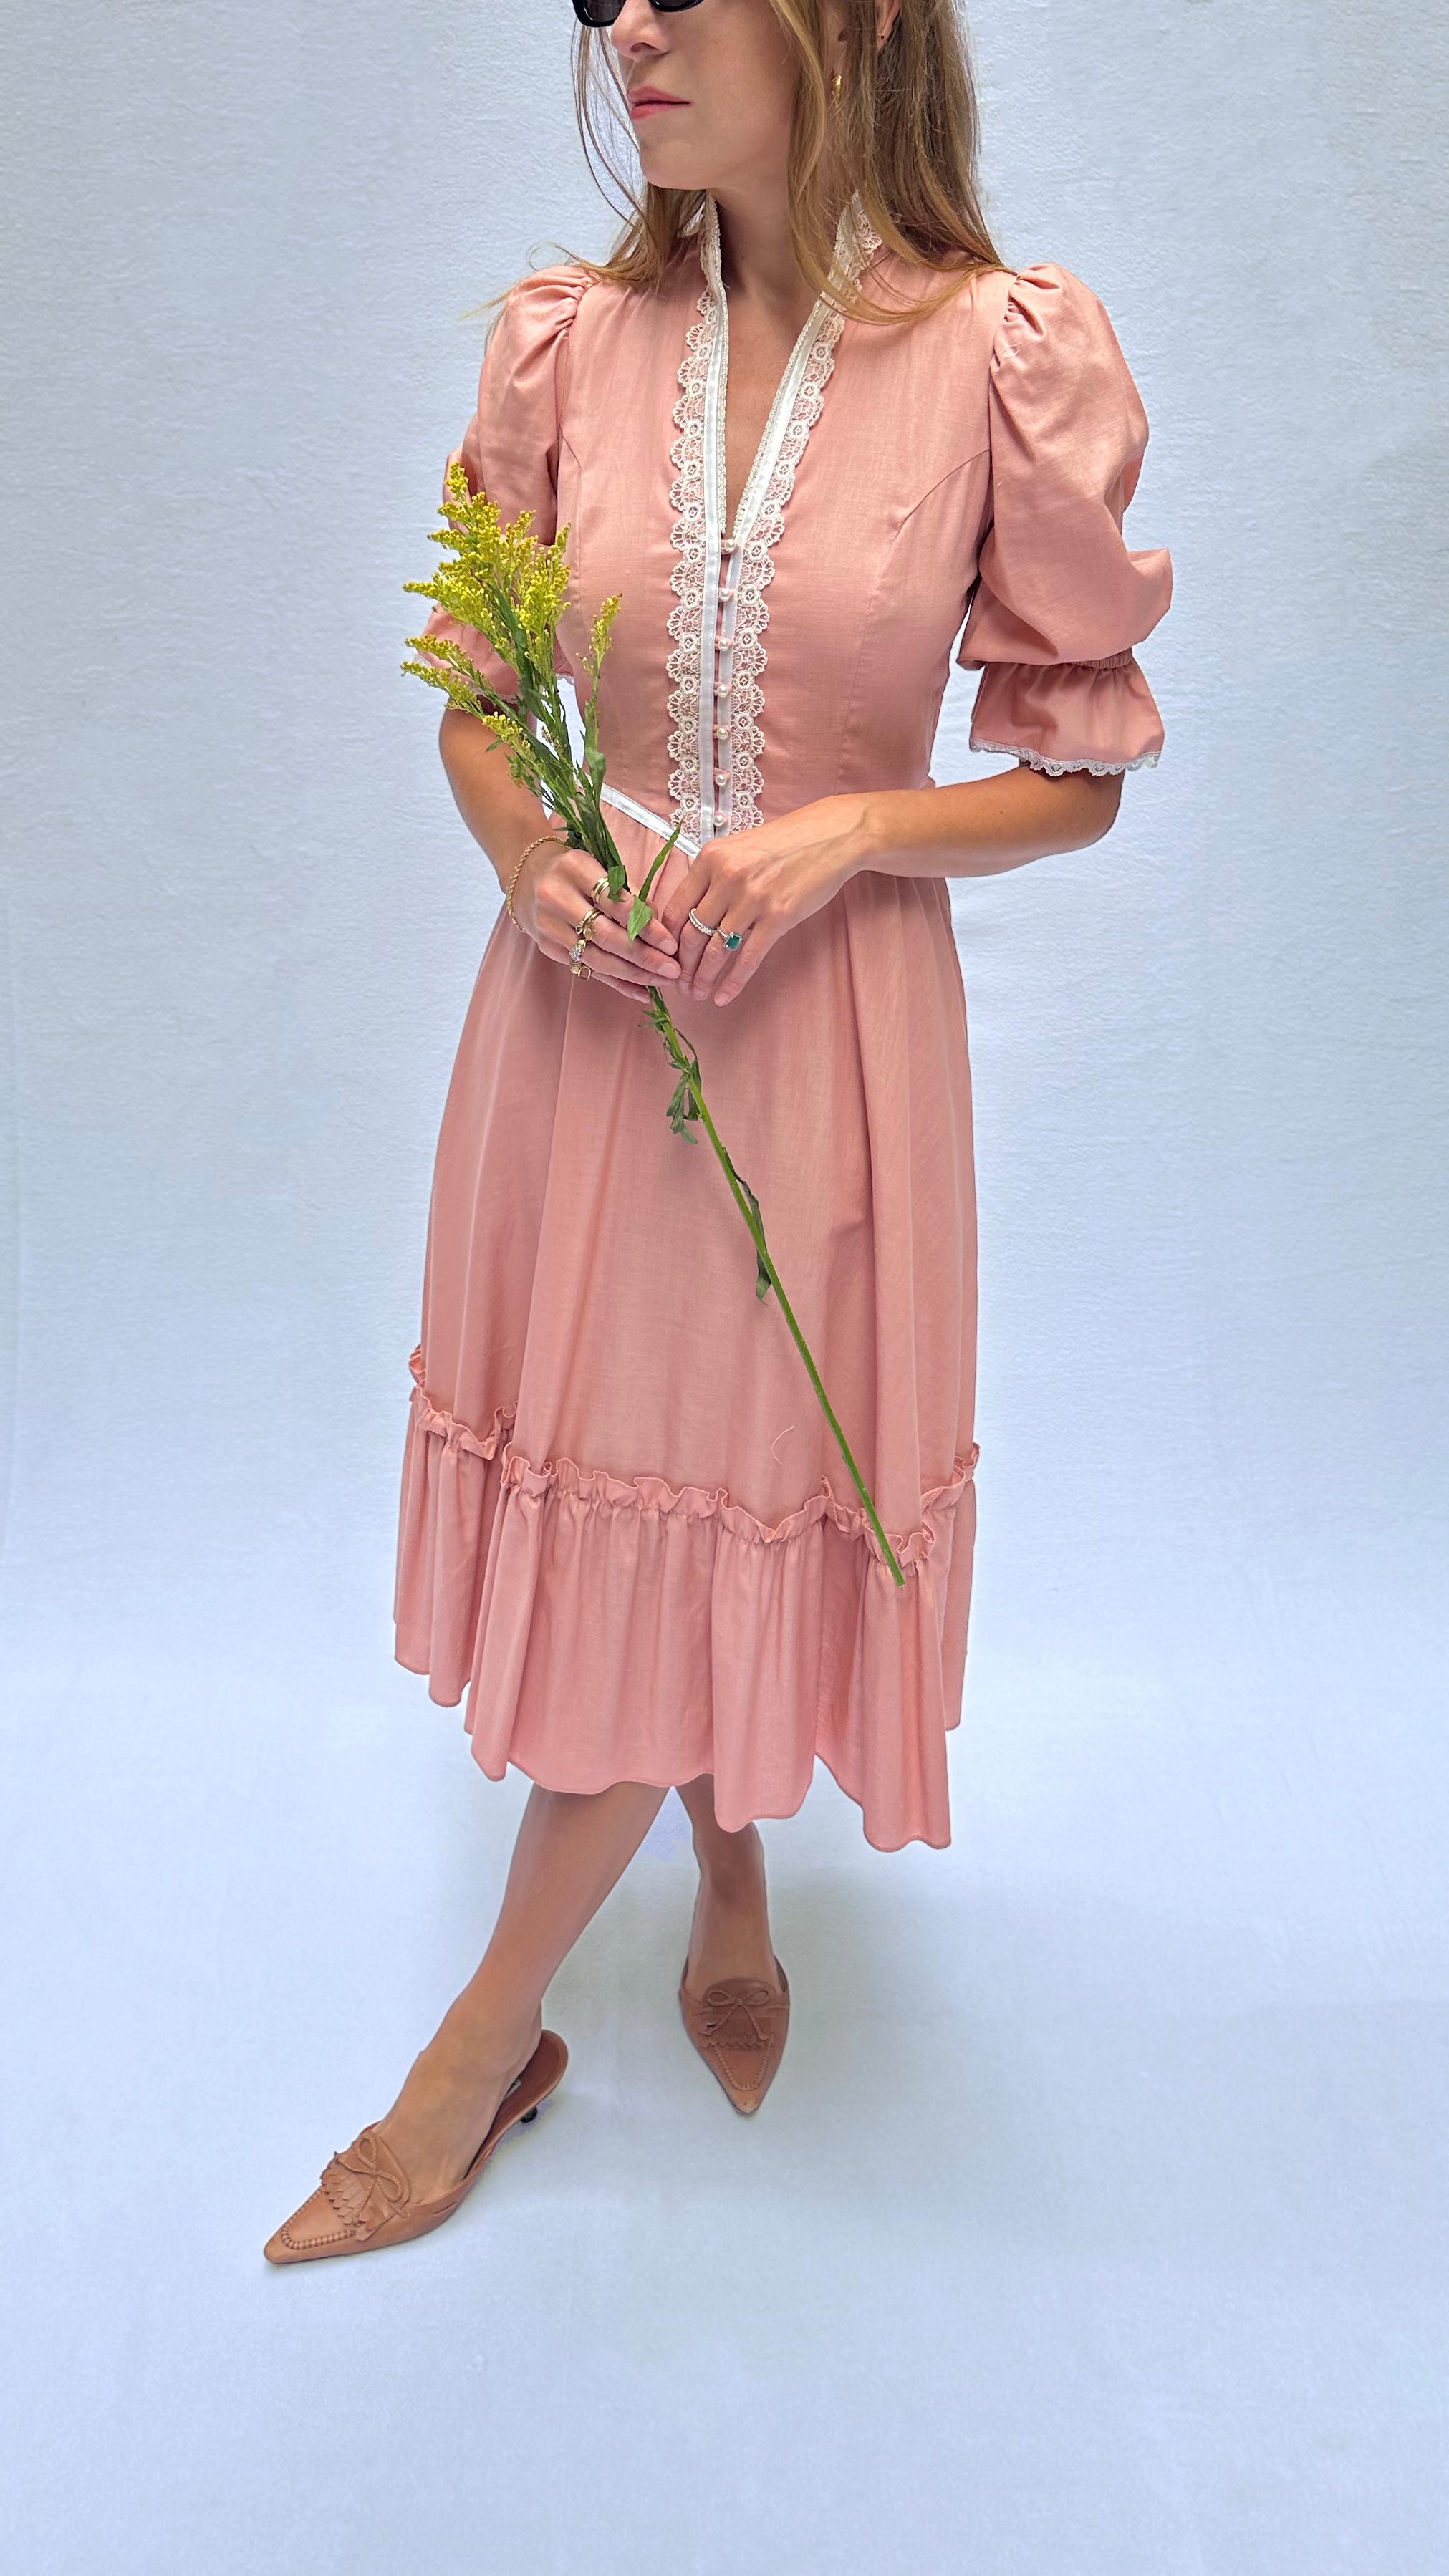 The vintage Gunne Sax dress you've been dreaming of: in the 1970s, Gunne Sax borrowed heavily from Victorian silhouettes, igniting an entire aesthetic that went on to define the style of an era. I especially love the fitted princess-seamed Victorian